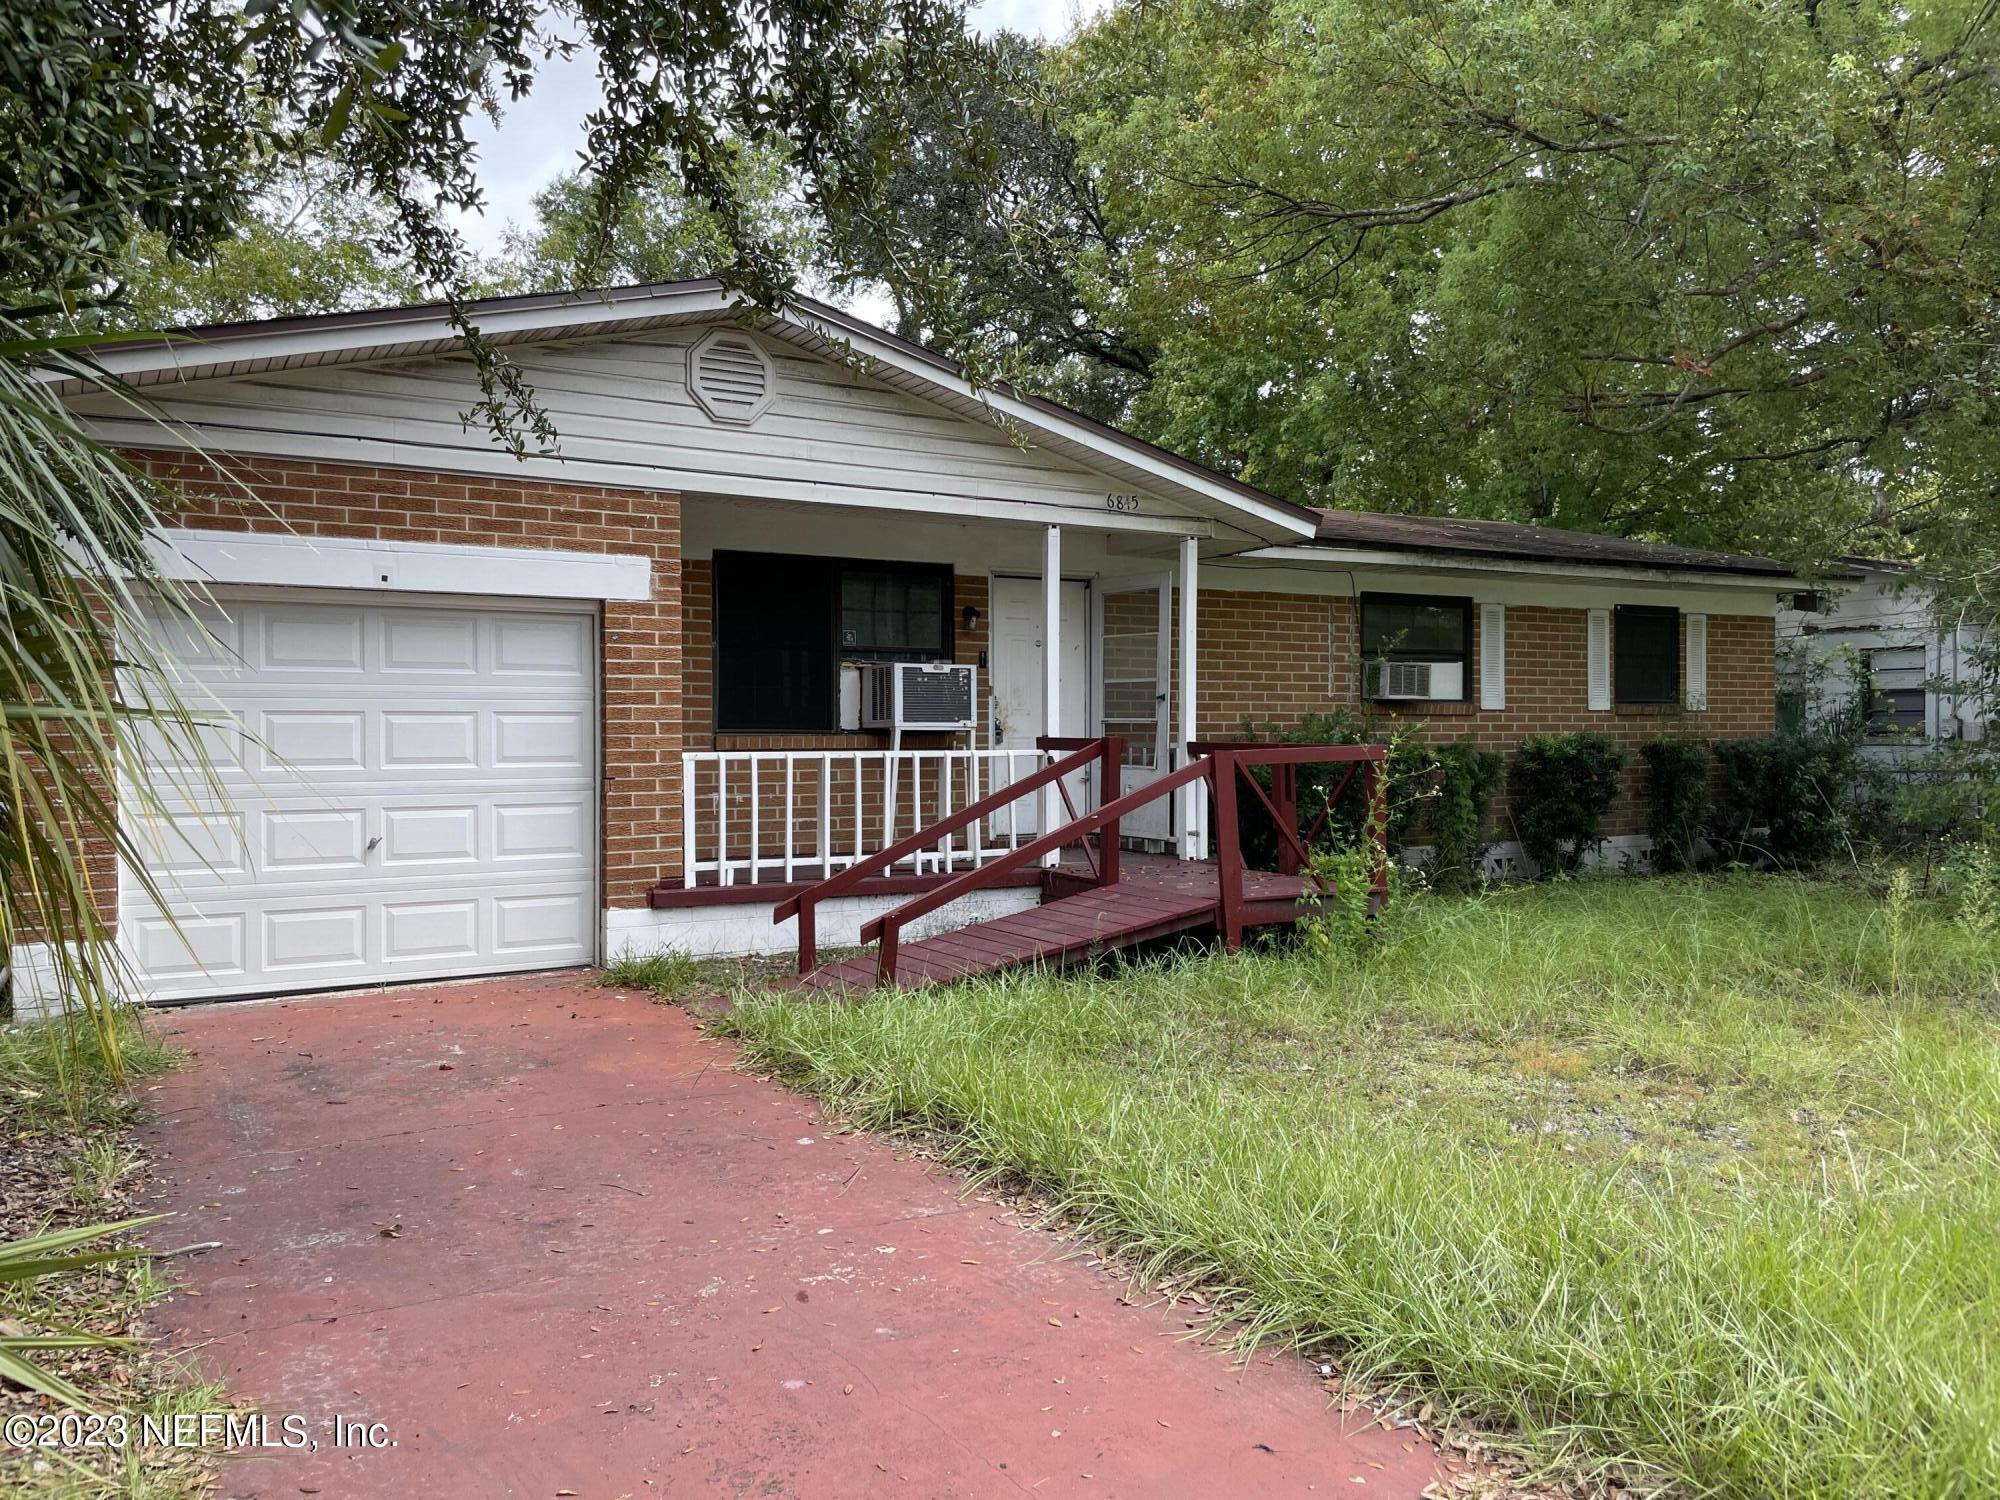 Jacksonville, FL home for sale located at 6845 RHODE ISLAND Drive E, Jacksonville, FL 32209